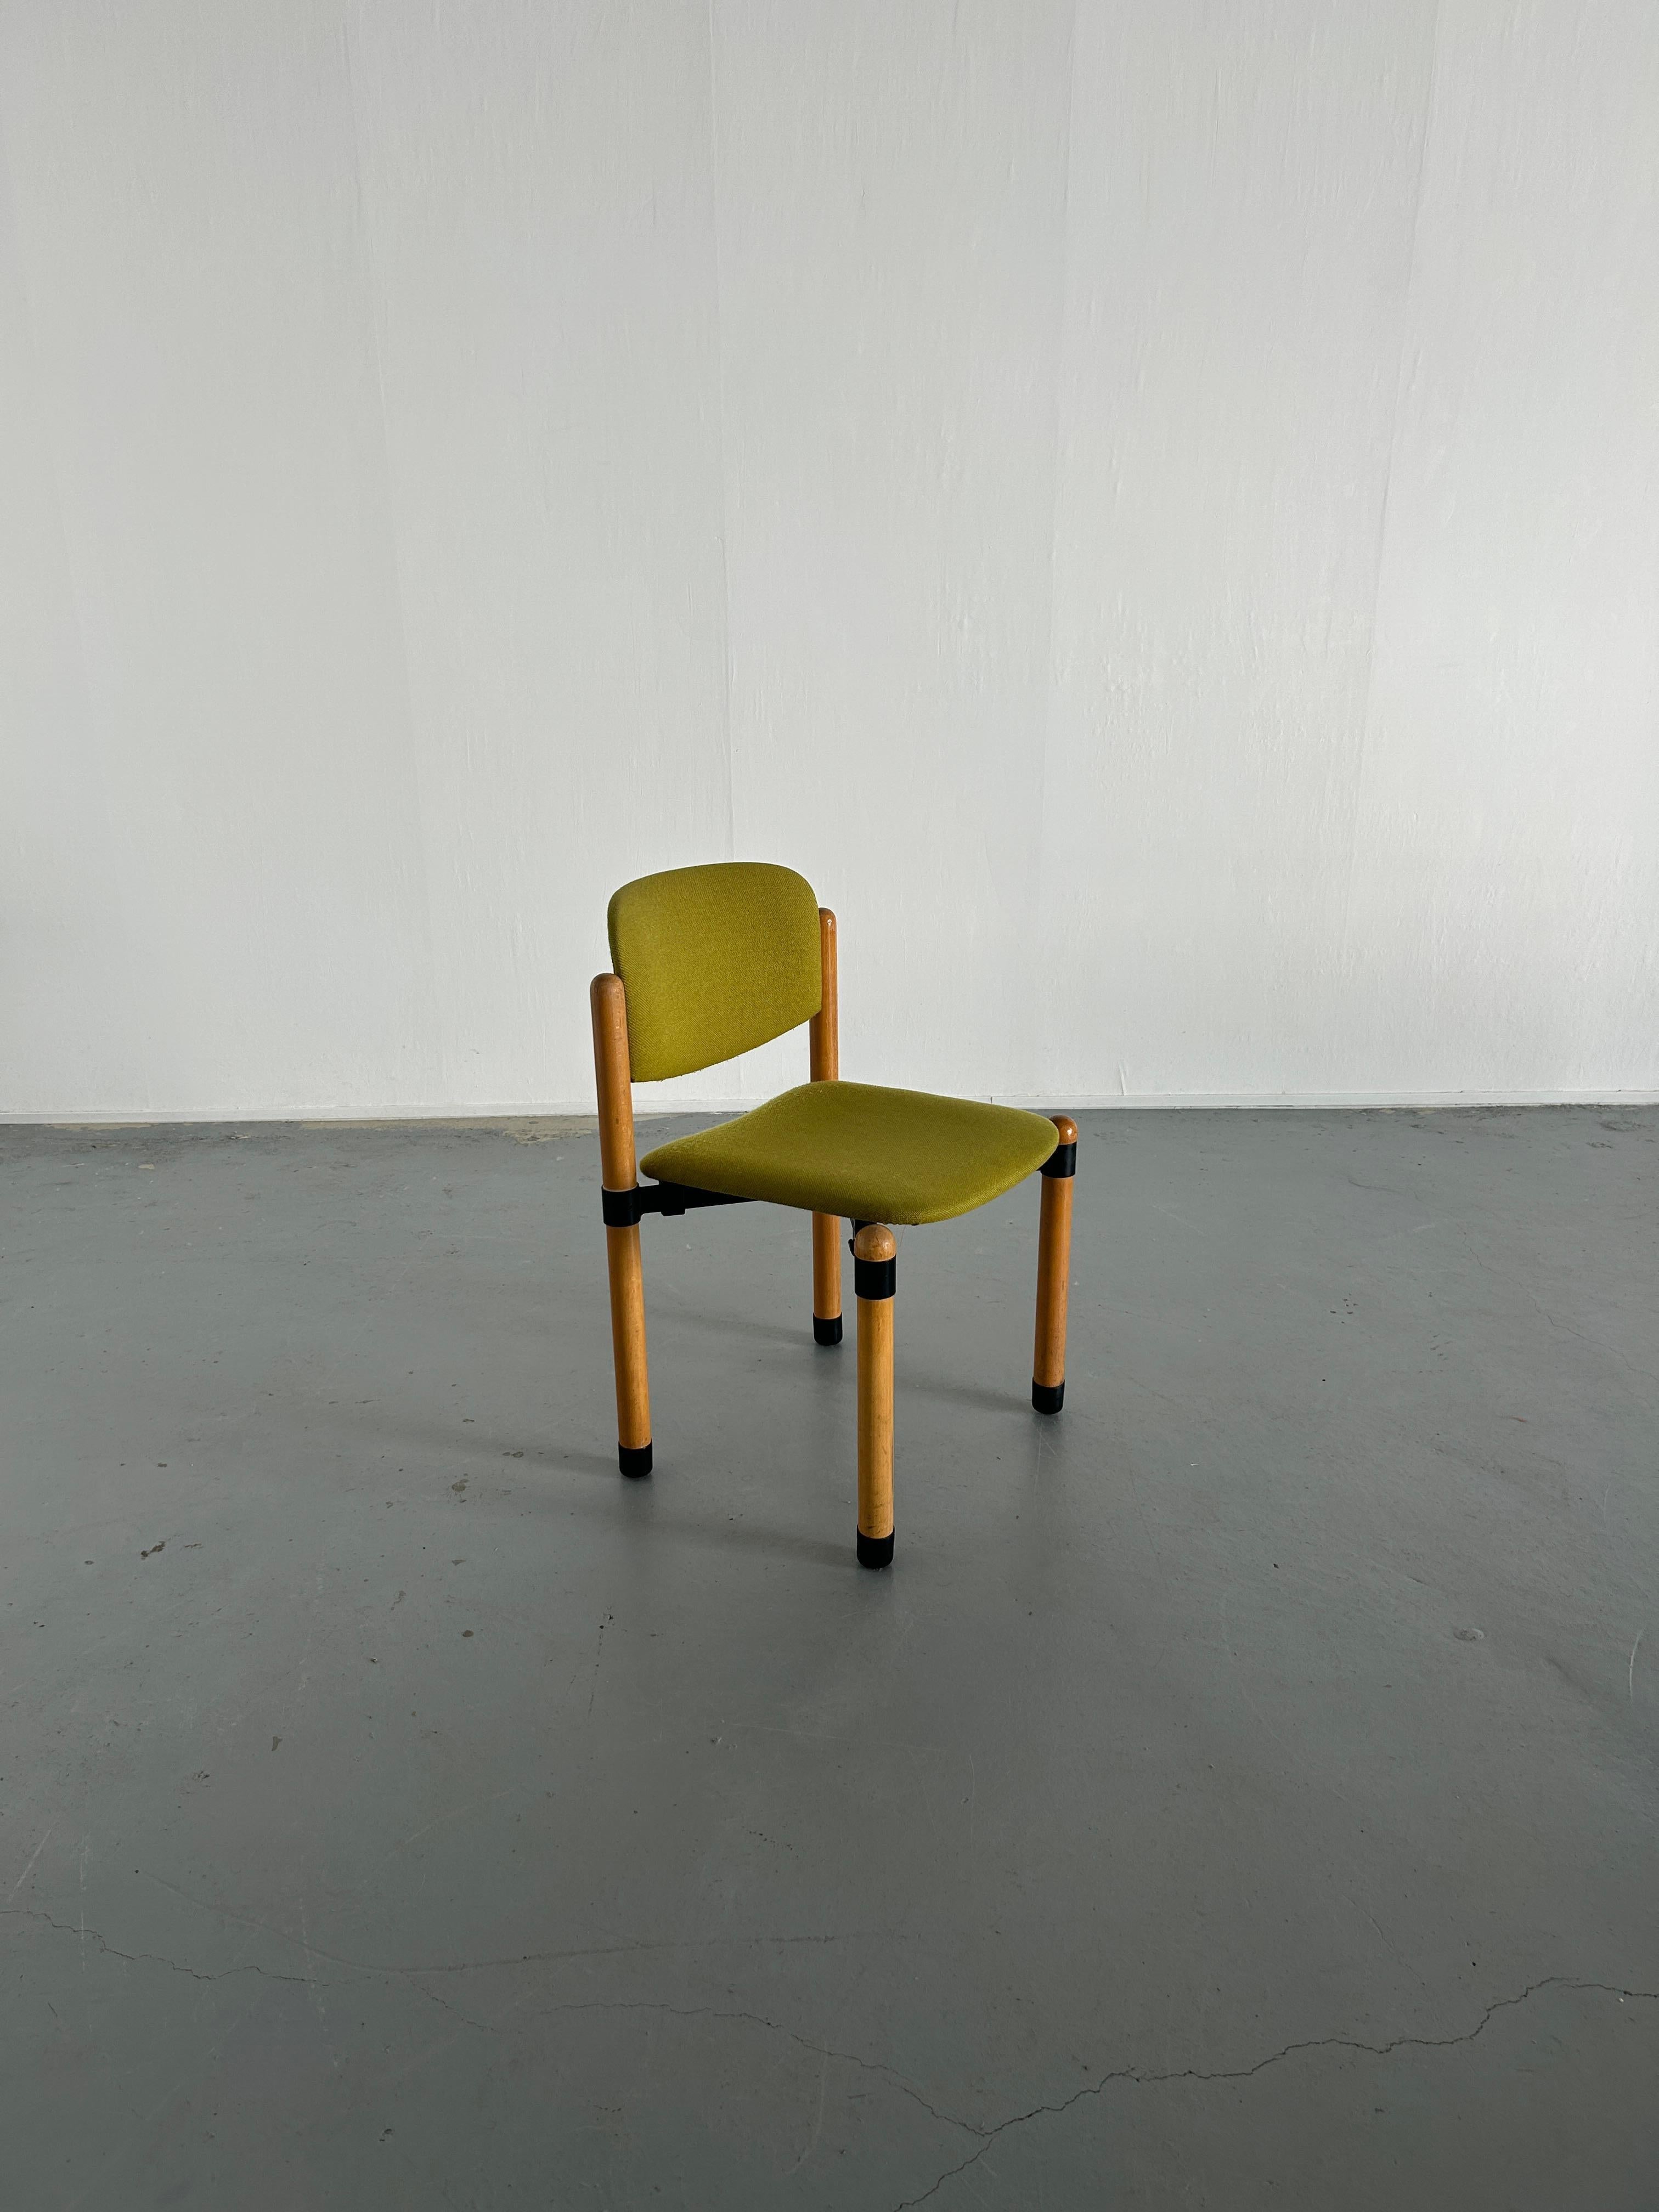 Late 20th Century 1/10 Mid Century Modern Stackable Dining Chairs by Fröscher Sitform, 70s Germany